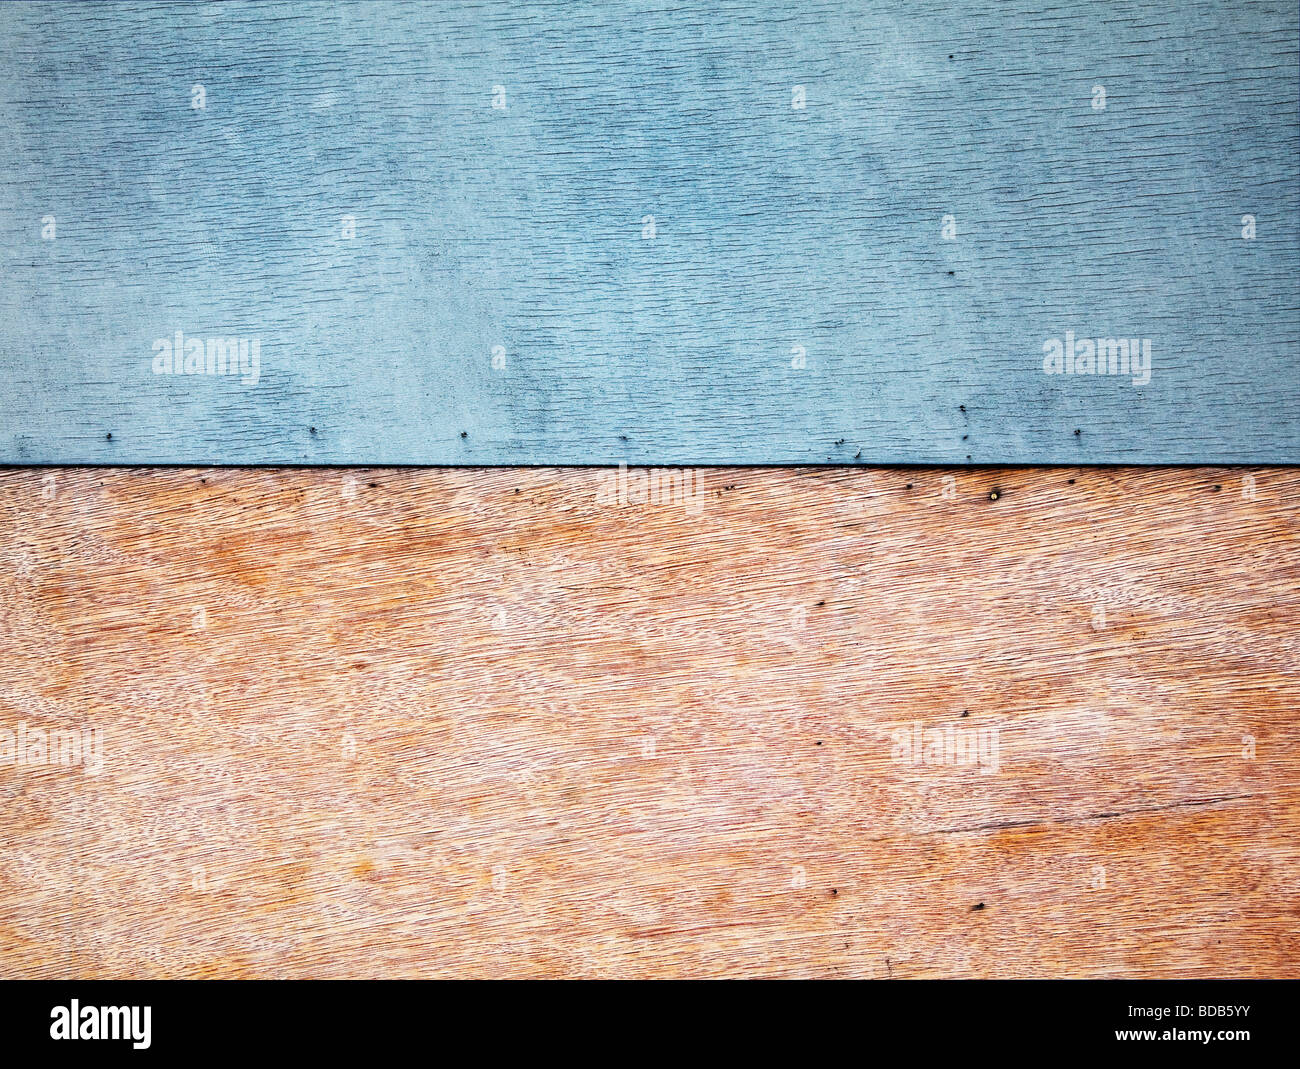 Plywood Wall Painted Blue And Brown Stock Photo 25447071 Alamy